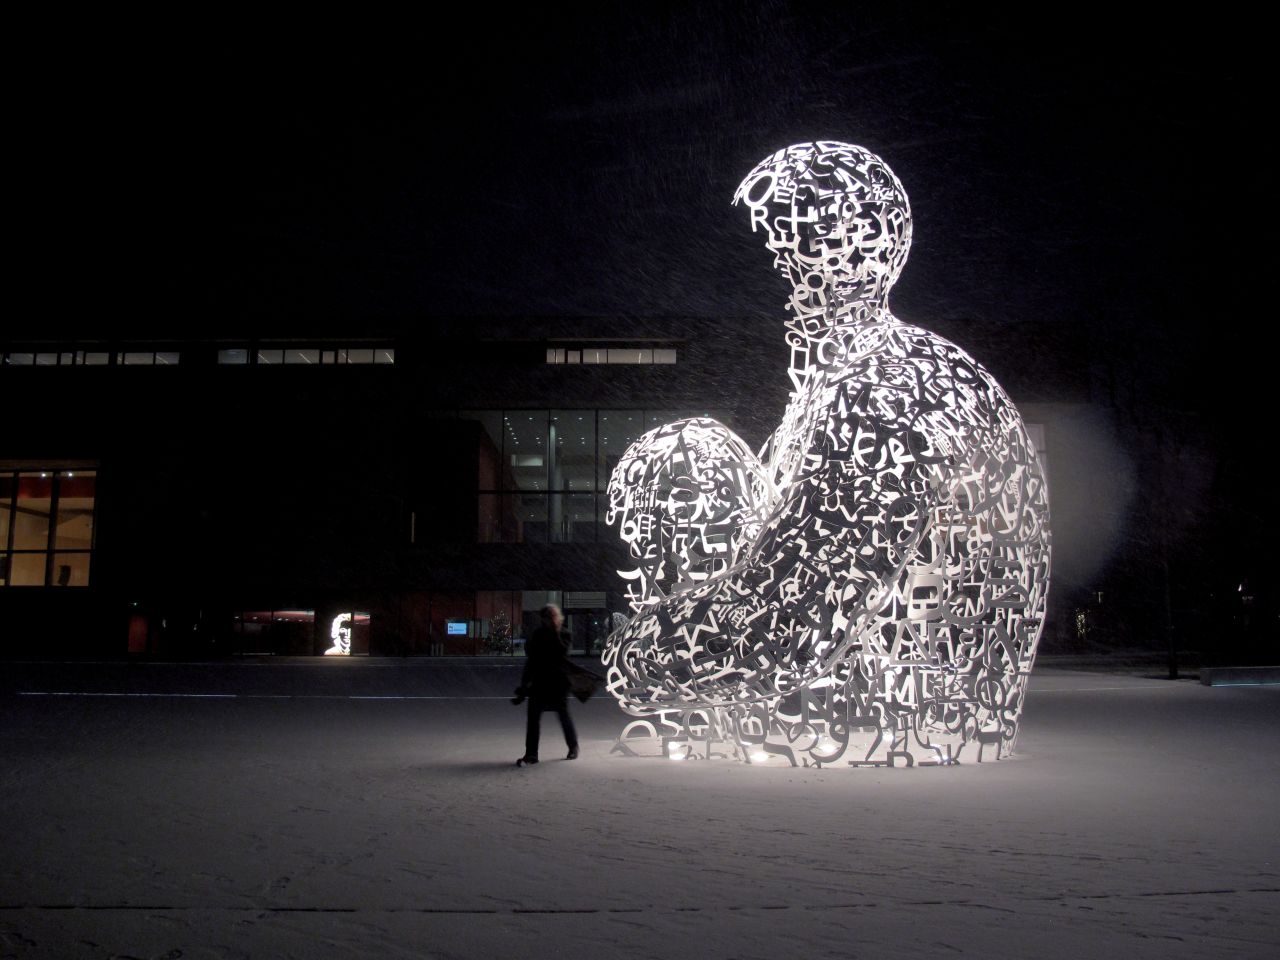 <em>Body of Knowledge, Jaume Plensa, 2010</em><br /><br />The impulse to create art at either end of the scale of size -- works that are so large, or so small, that they barely seem possible -- appears to be instinctive. Throughout history, we have marveled at intricately crafted objects, whether it be fine carving, jewelry or sculpture. Likewise, grand projects that have an impact on the wider environment and leave a lasting legacy have long instilled appreciation and wonder, from megalithic stone monuments to the Nazca lines of the Andes.<br /><br /><a href="http://www.amazon.co.uk/Big-Art-Small-Tristan-Manco/dp/0500239223" target="_blank" target="_blank"><strong>Big Art Small Art</strong></a>, by Tristan Manco, is out now.